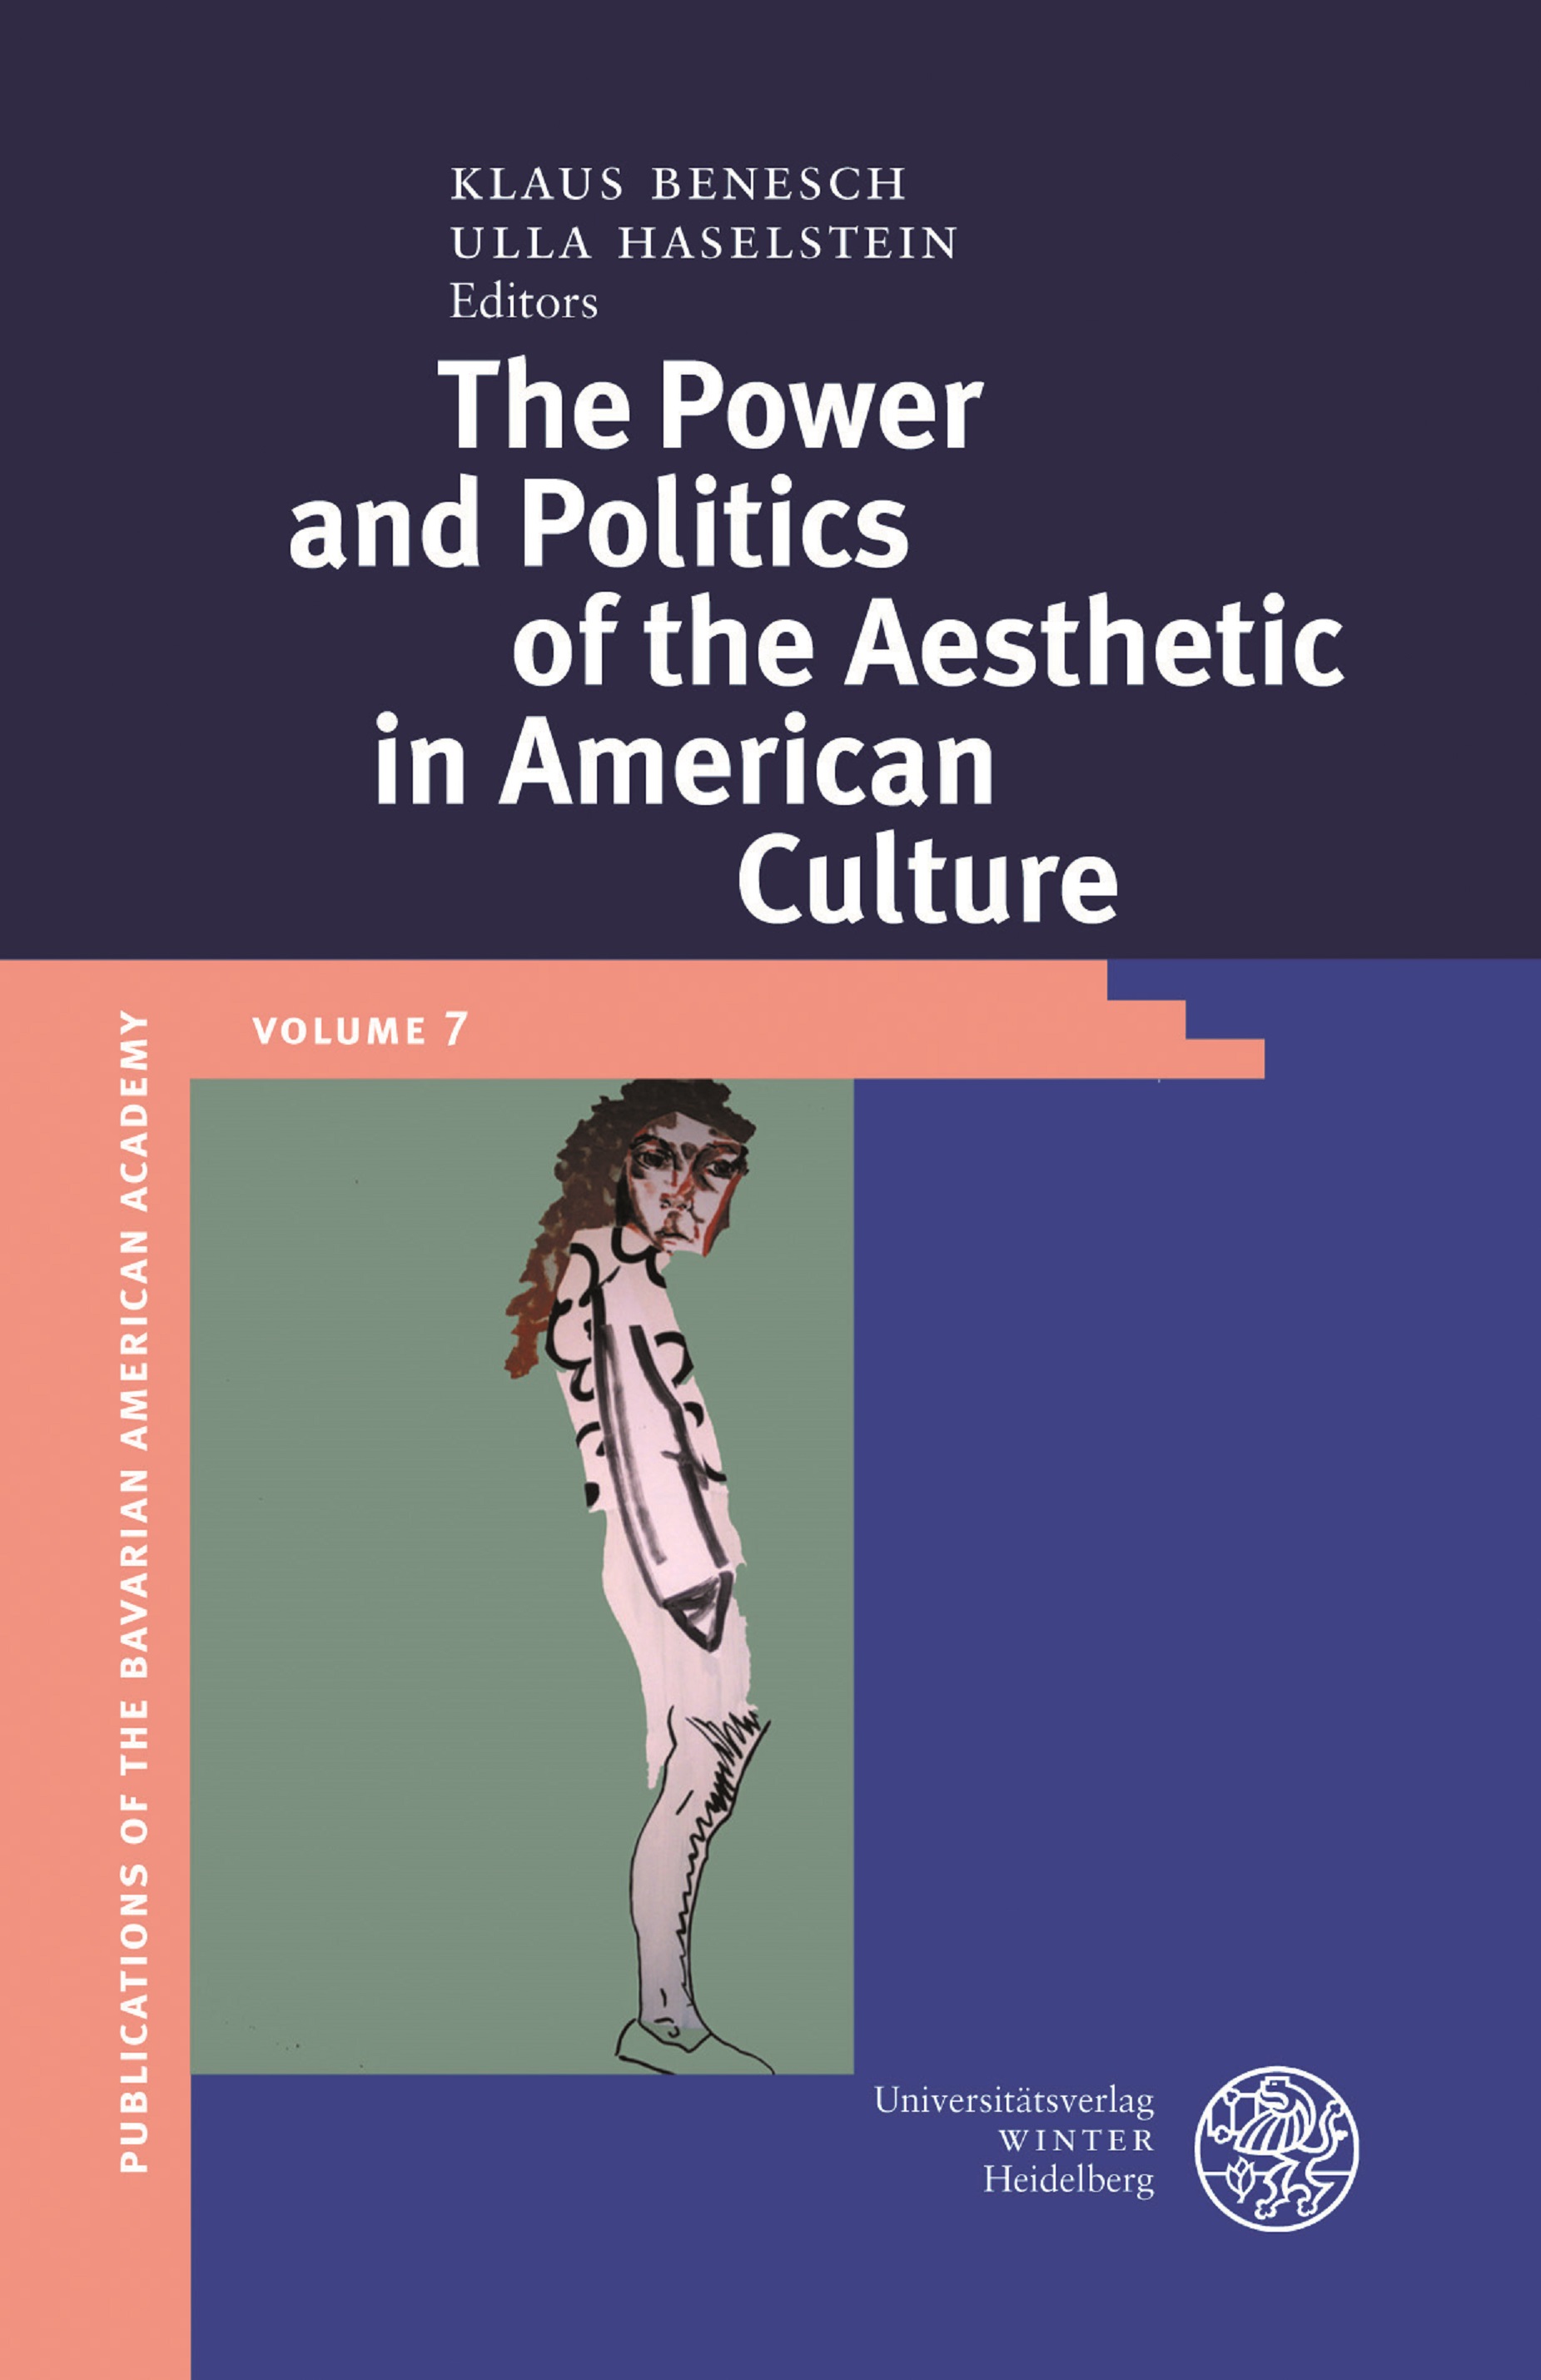 BAA-Publikation Vol. 7 The Power and Politics of the Aesthetic in American Culture